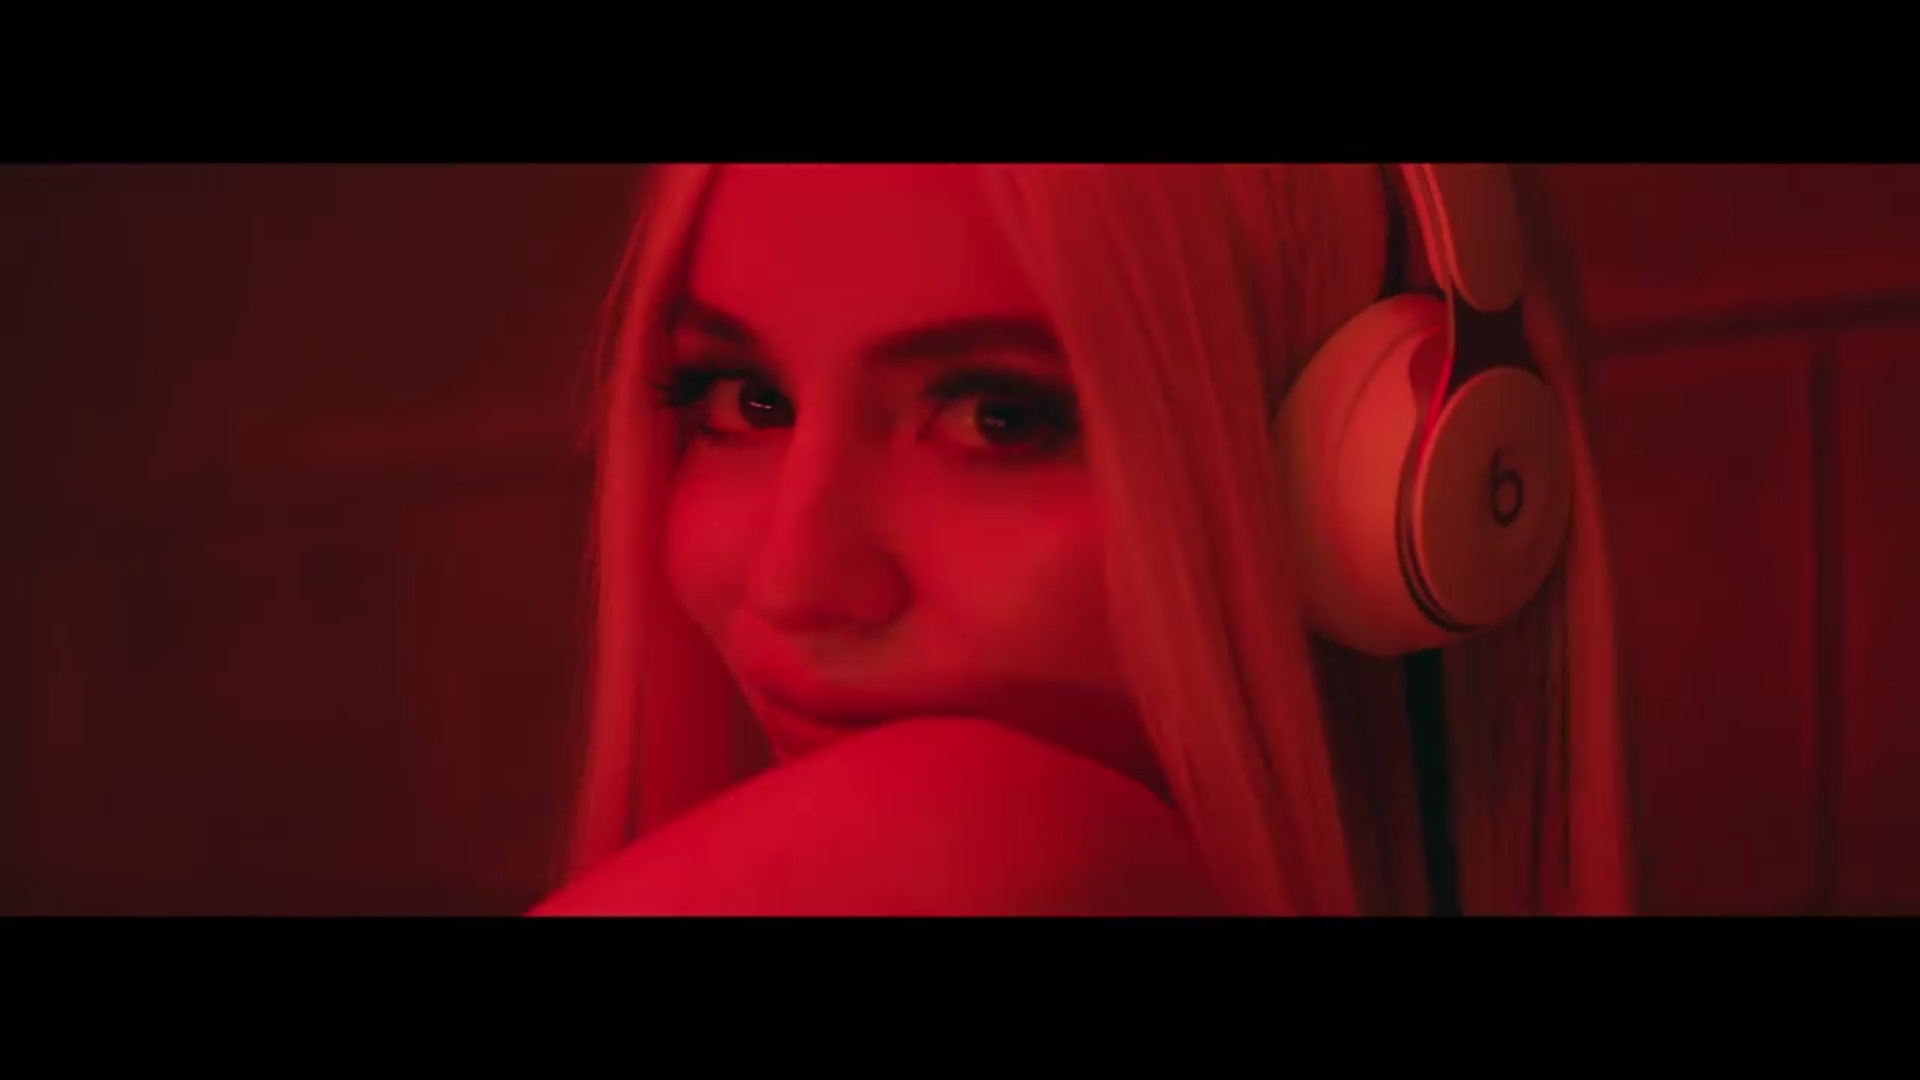 Ava Max. Ava Max take you to Hell. Ava Max Wallpaper. Ava Max my head my Heart Slowed Reverb. Take you to hell ava